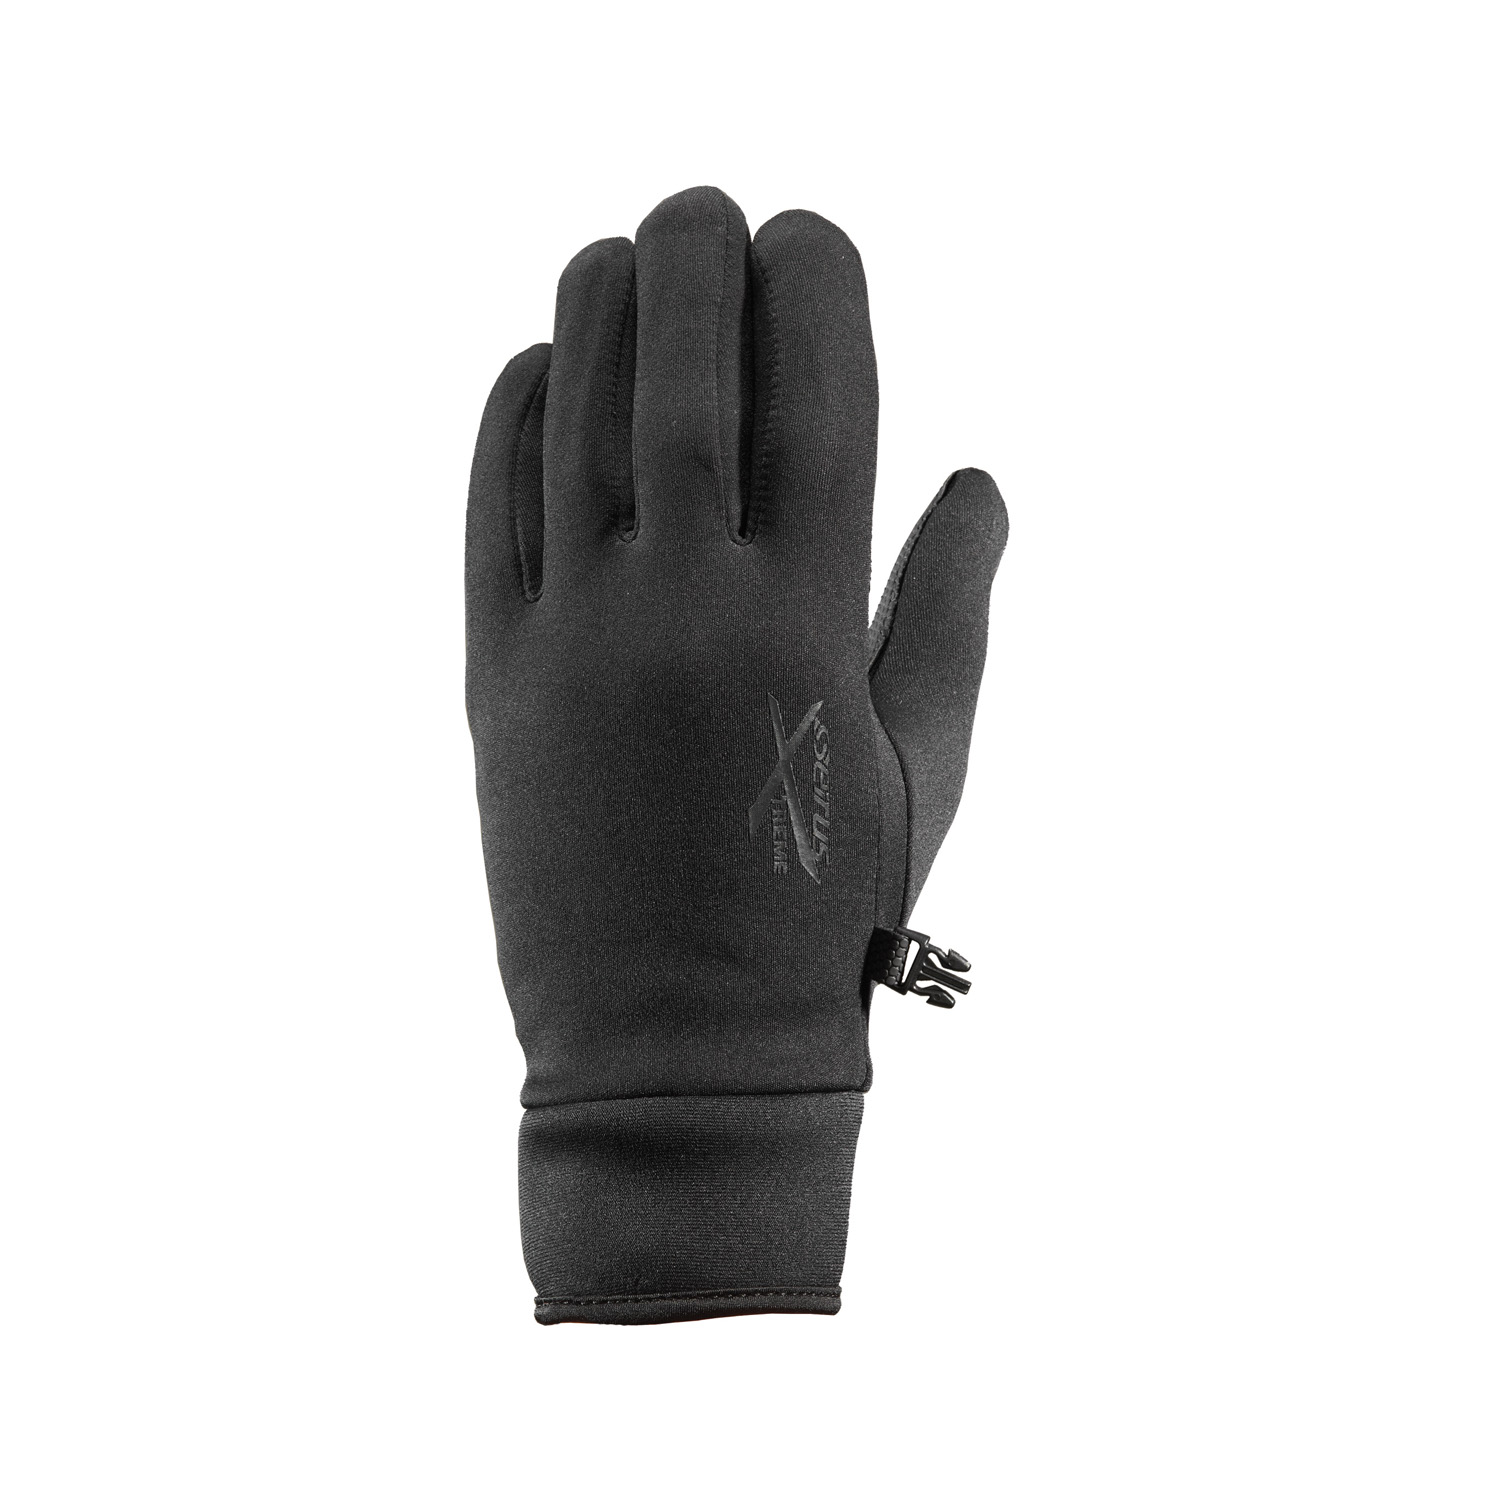 Seirus Xtreme All Weather Glove Mens Black Md - 8011.1.0013